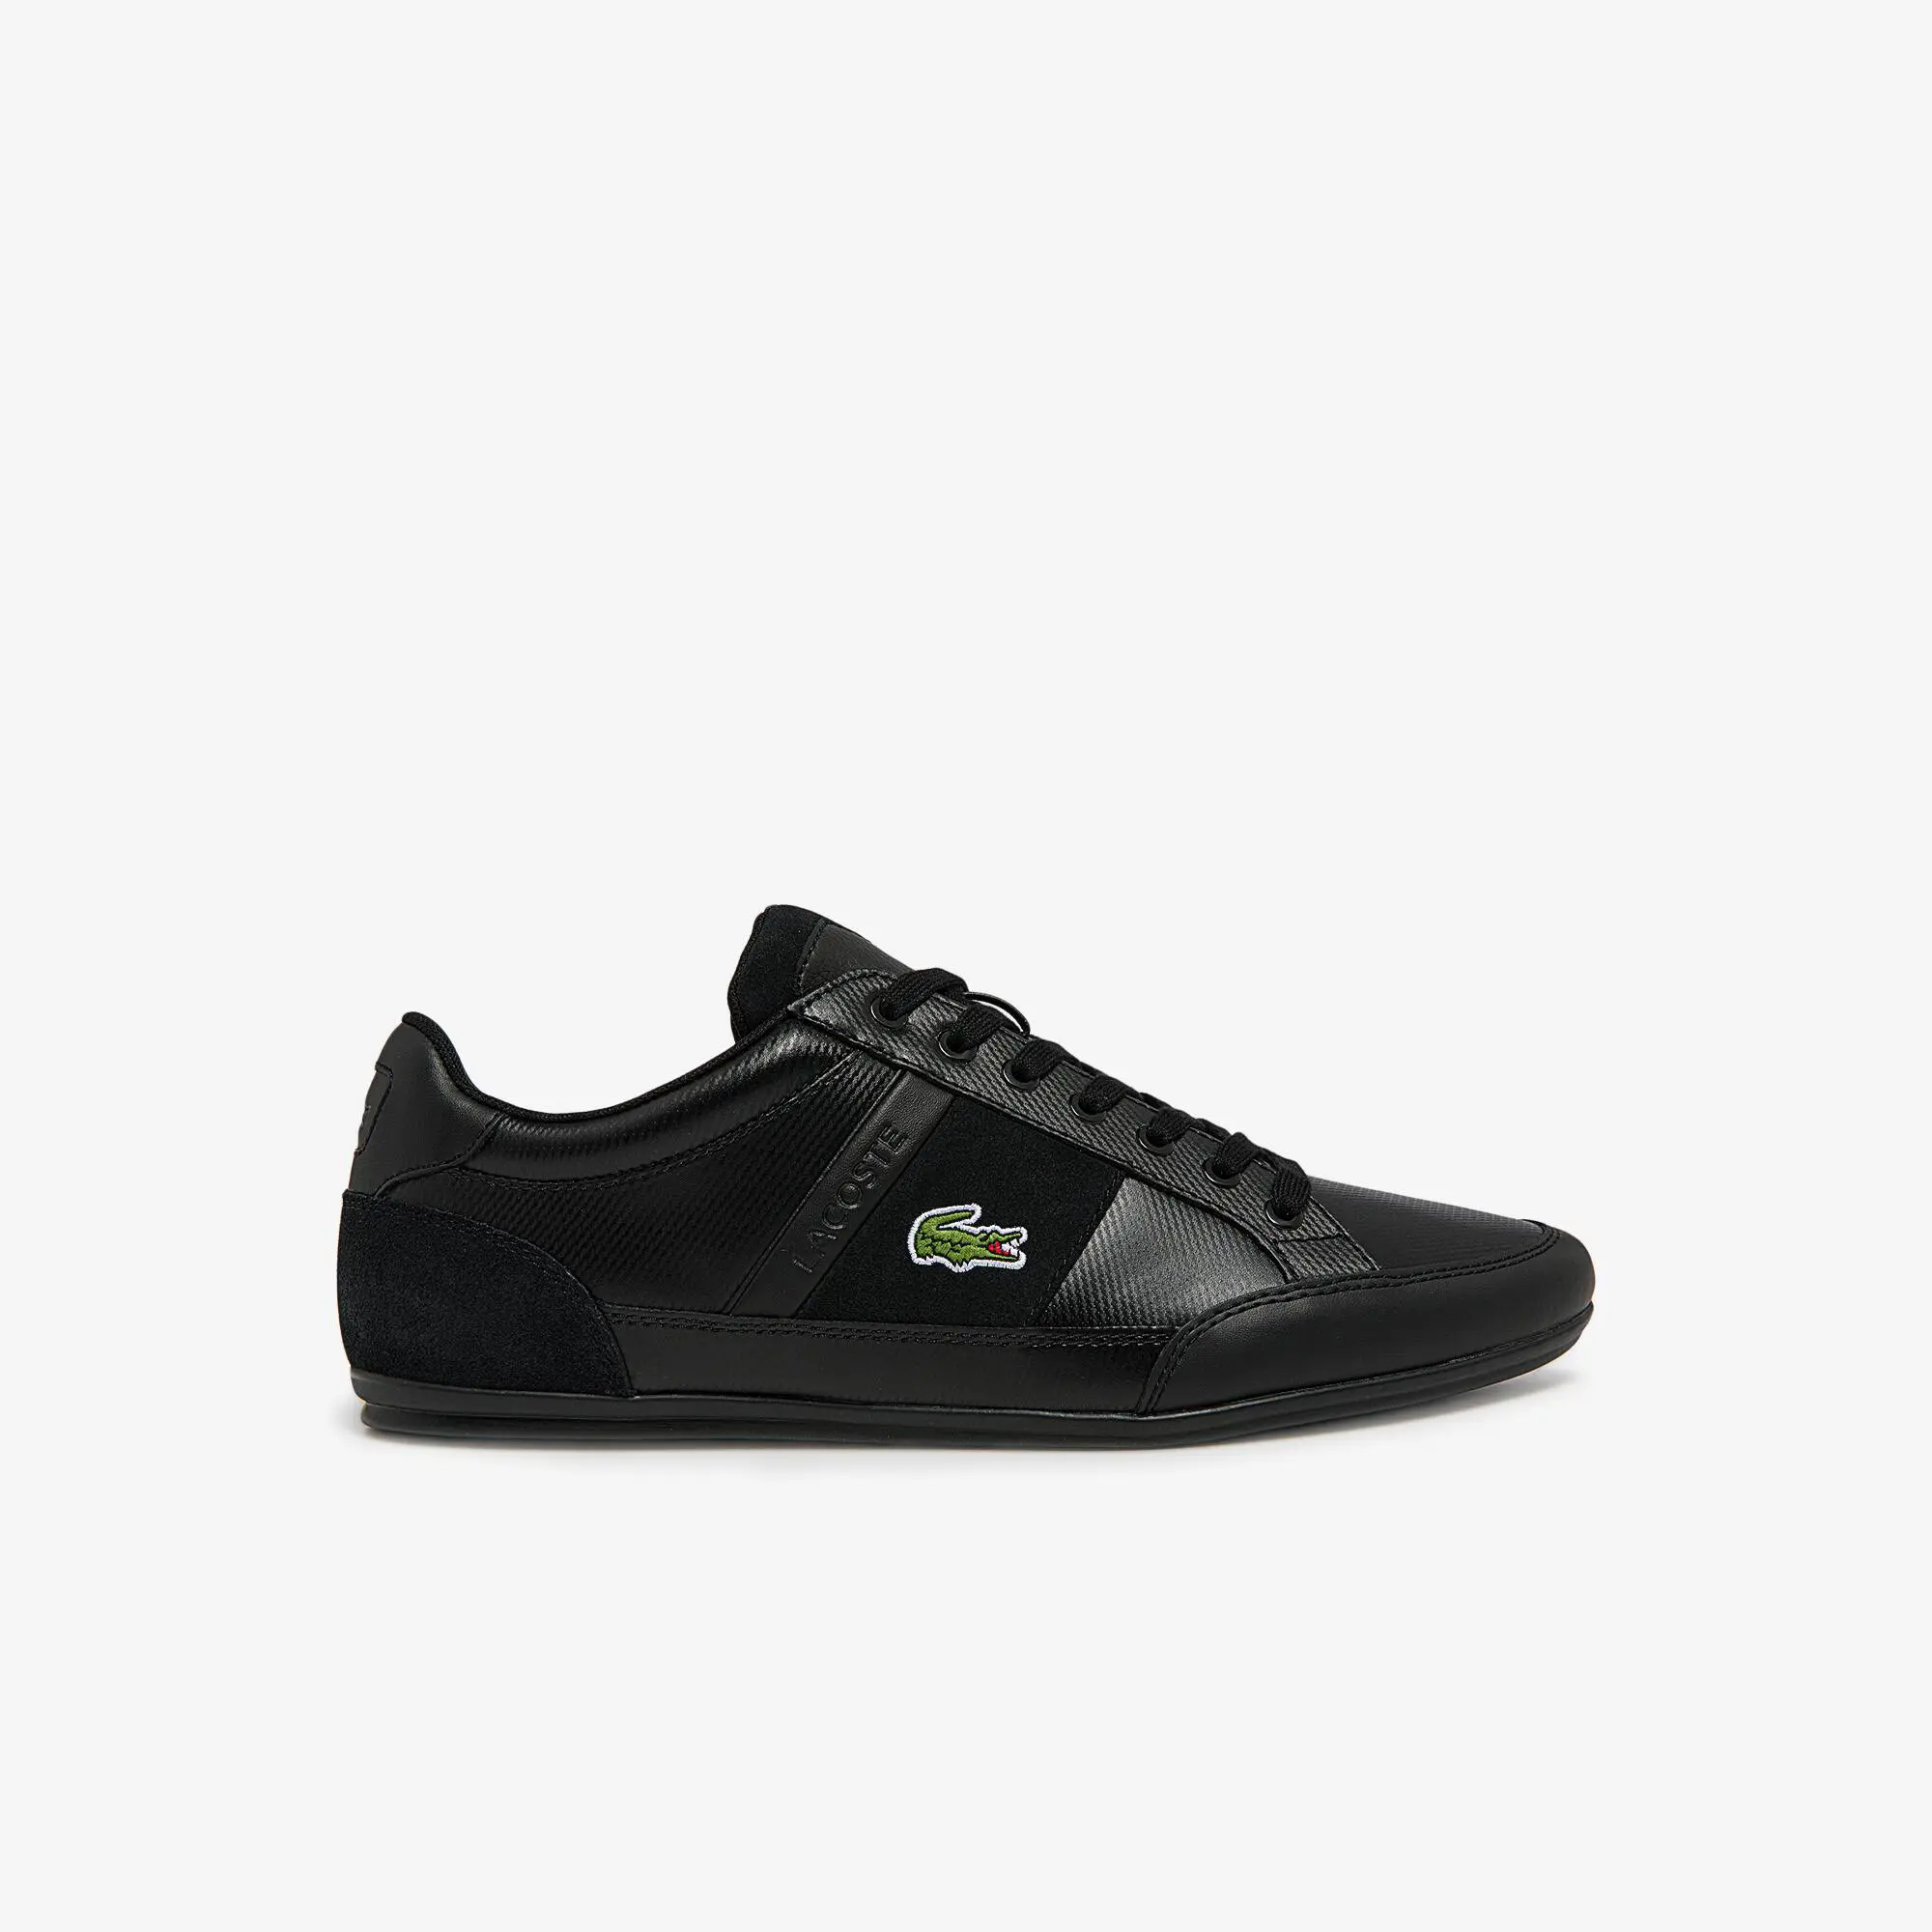 Lacoste Men's Chaymon BL Leather and Synthetic Tonal Trainers. 1